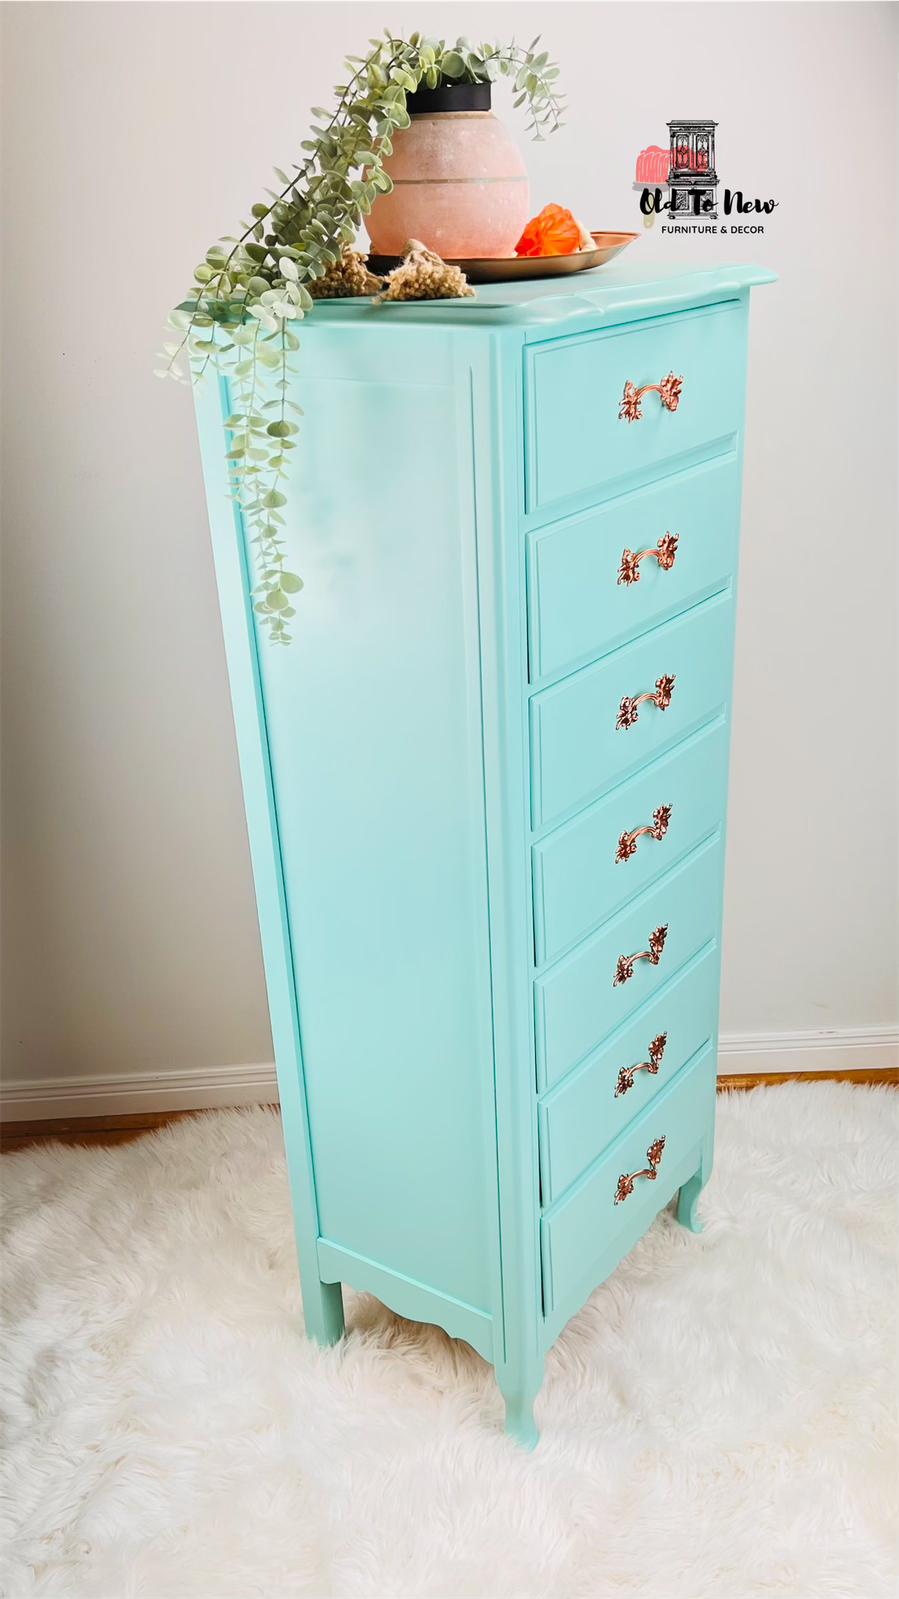 Stunning Turquoise Blue French Provincial Lingerie Dresser